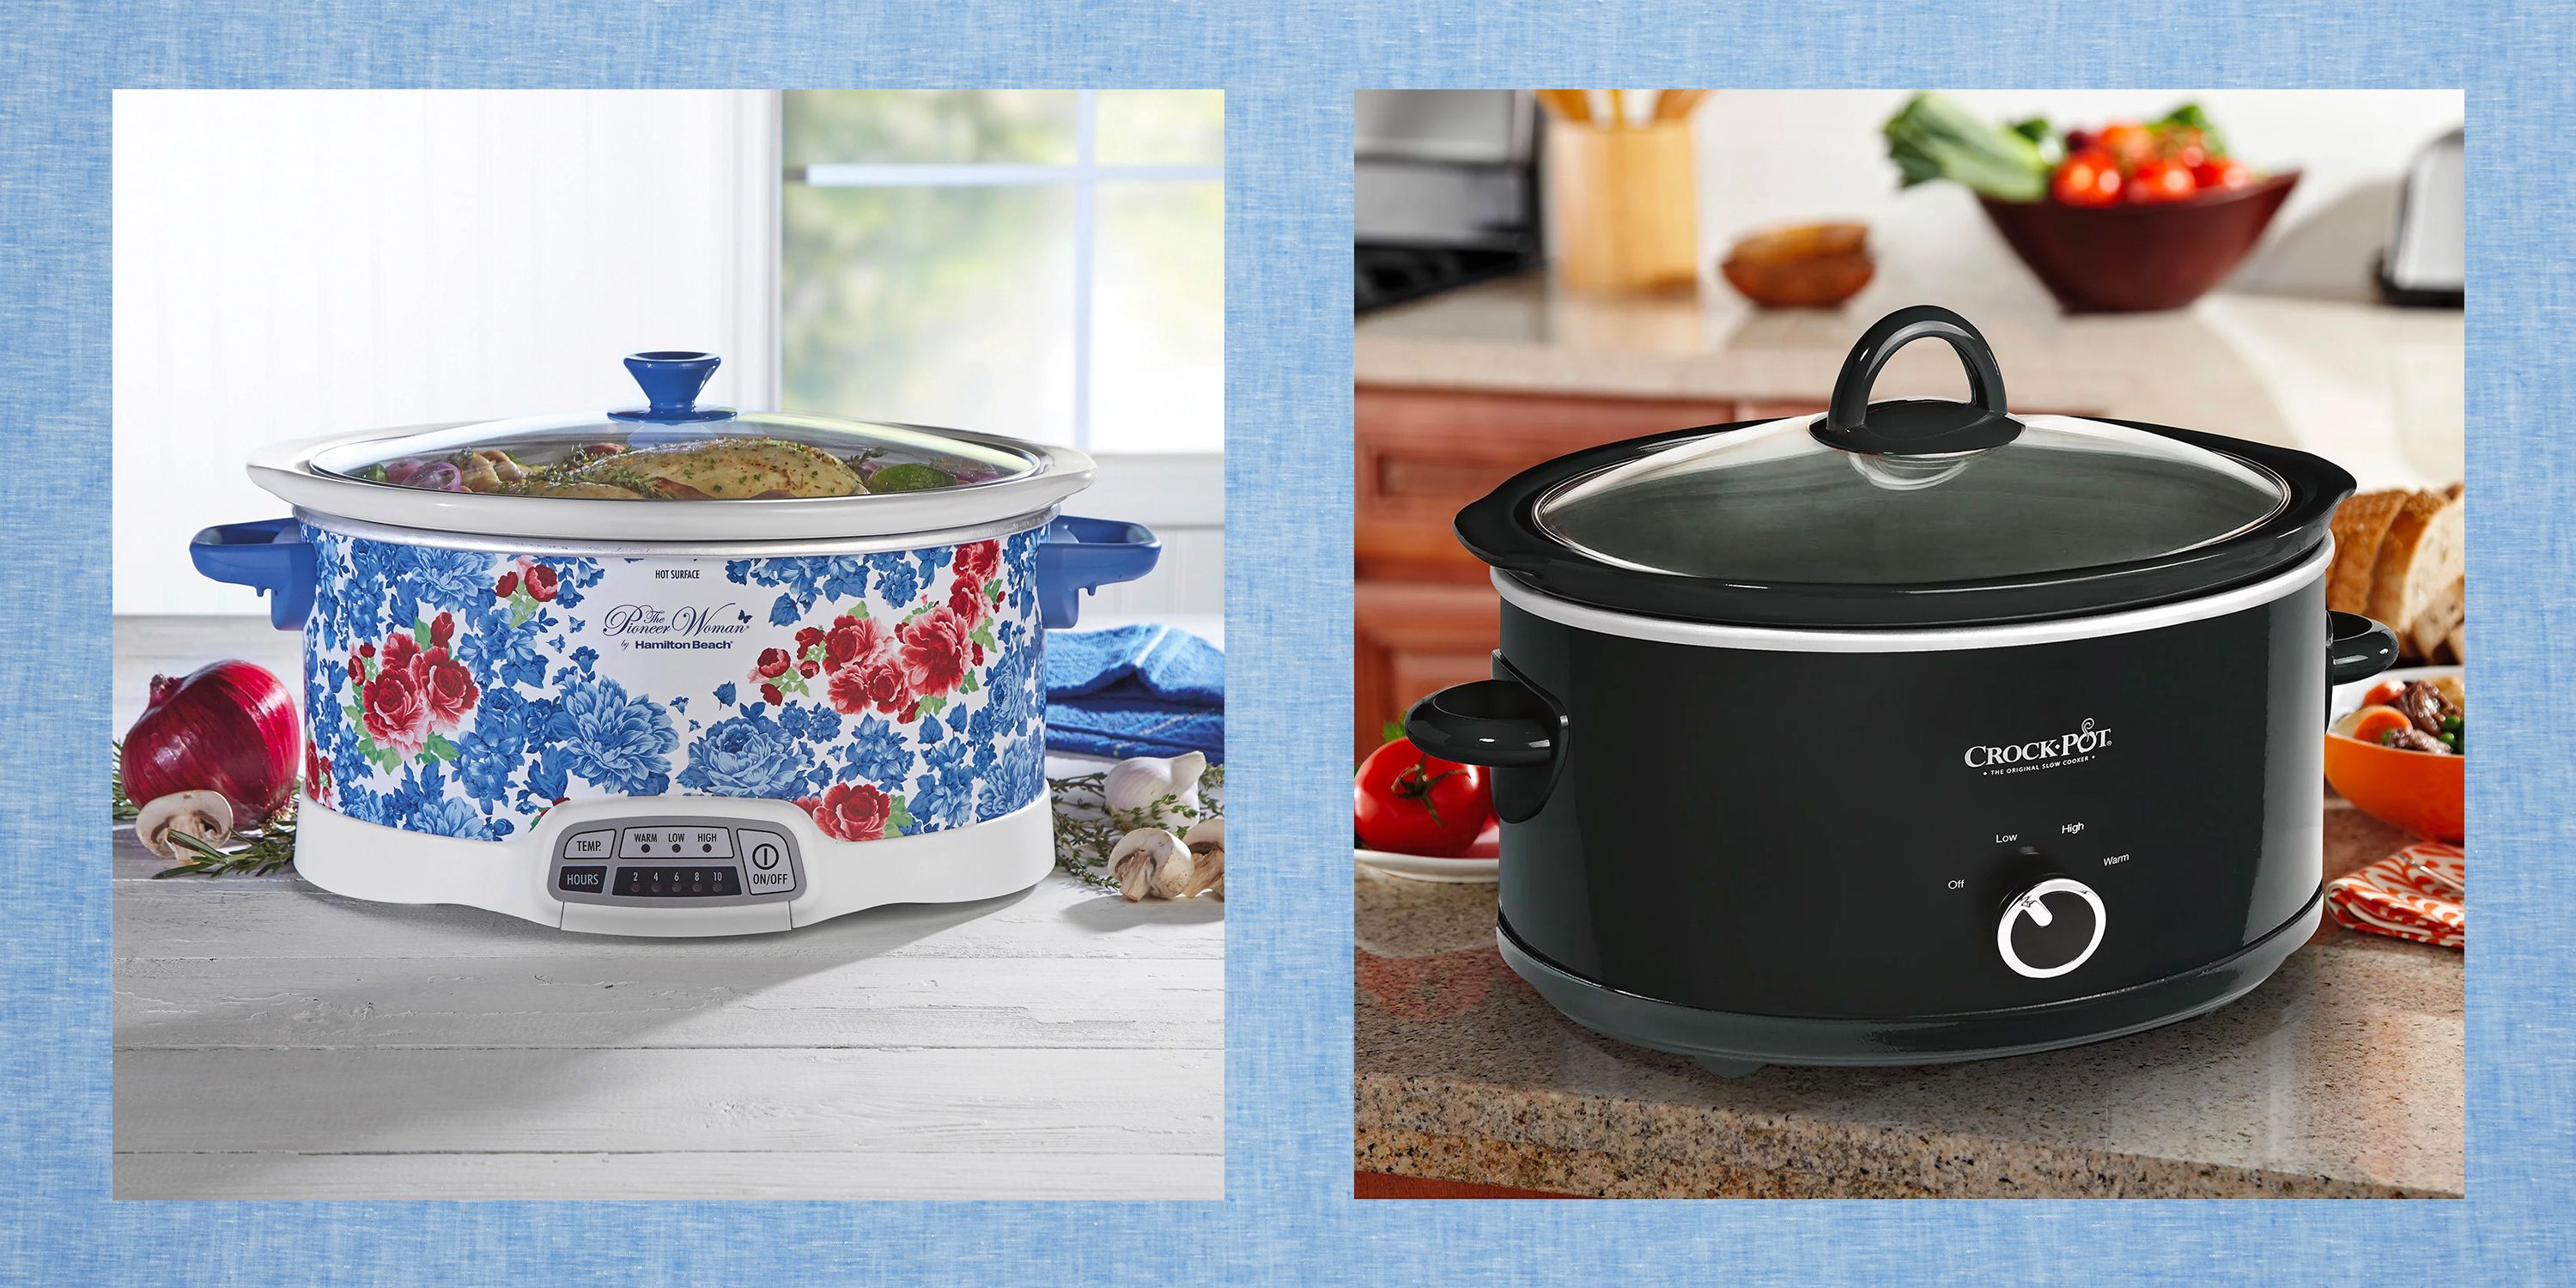 10 Incredible 3.5 Quart Slow Cooker For 2023